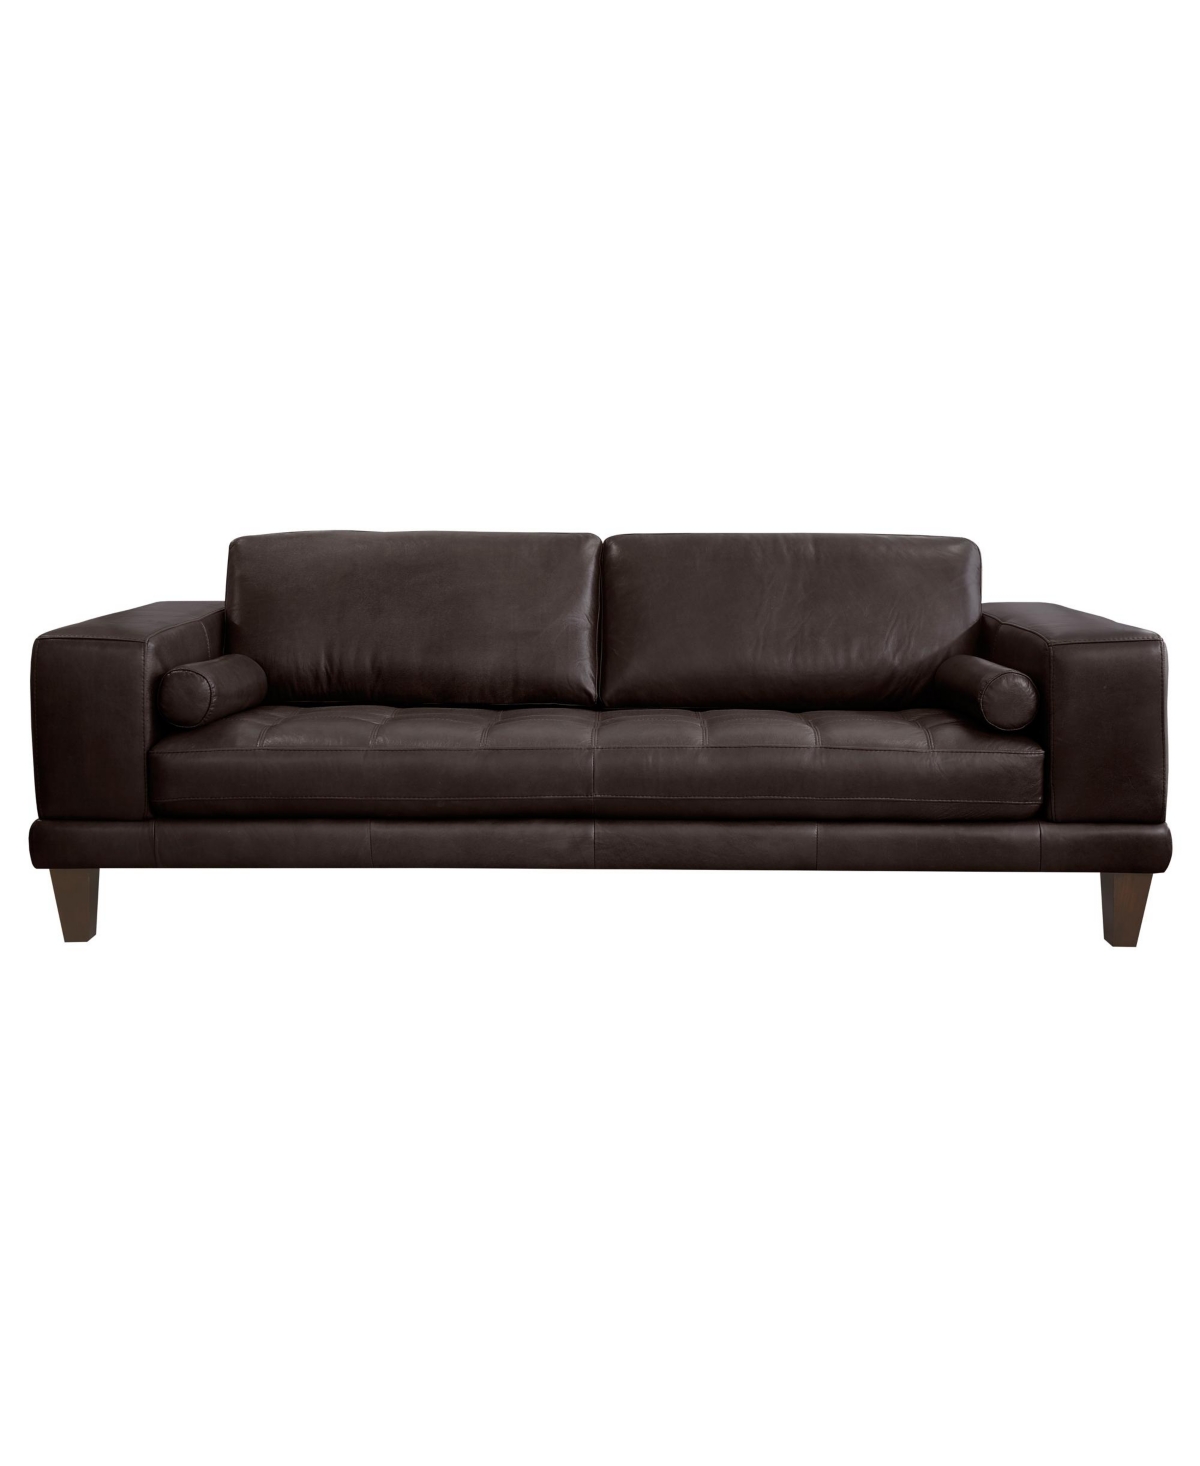 Armen Living Wynne 94" Genuine Leather With Wood Legs In Contemporary Sofa In Espresso